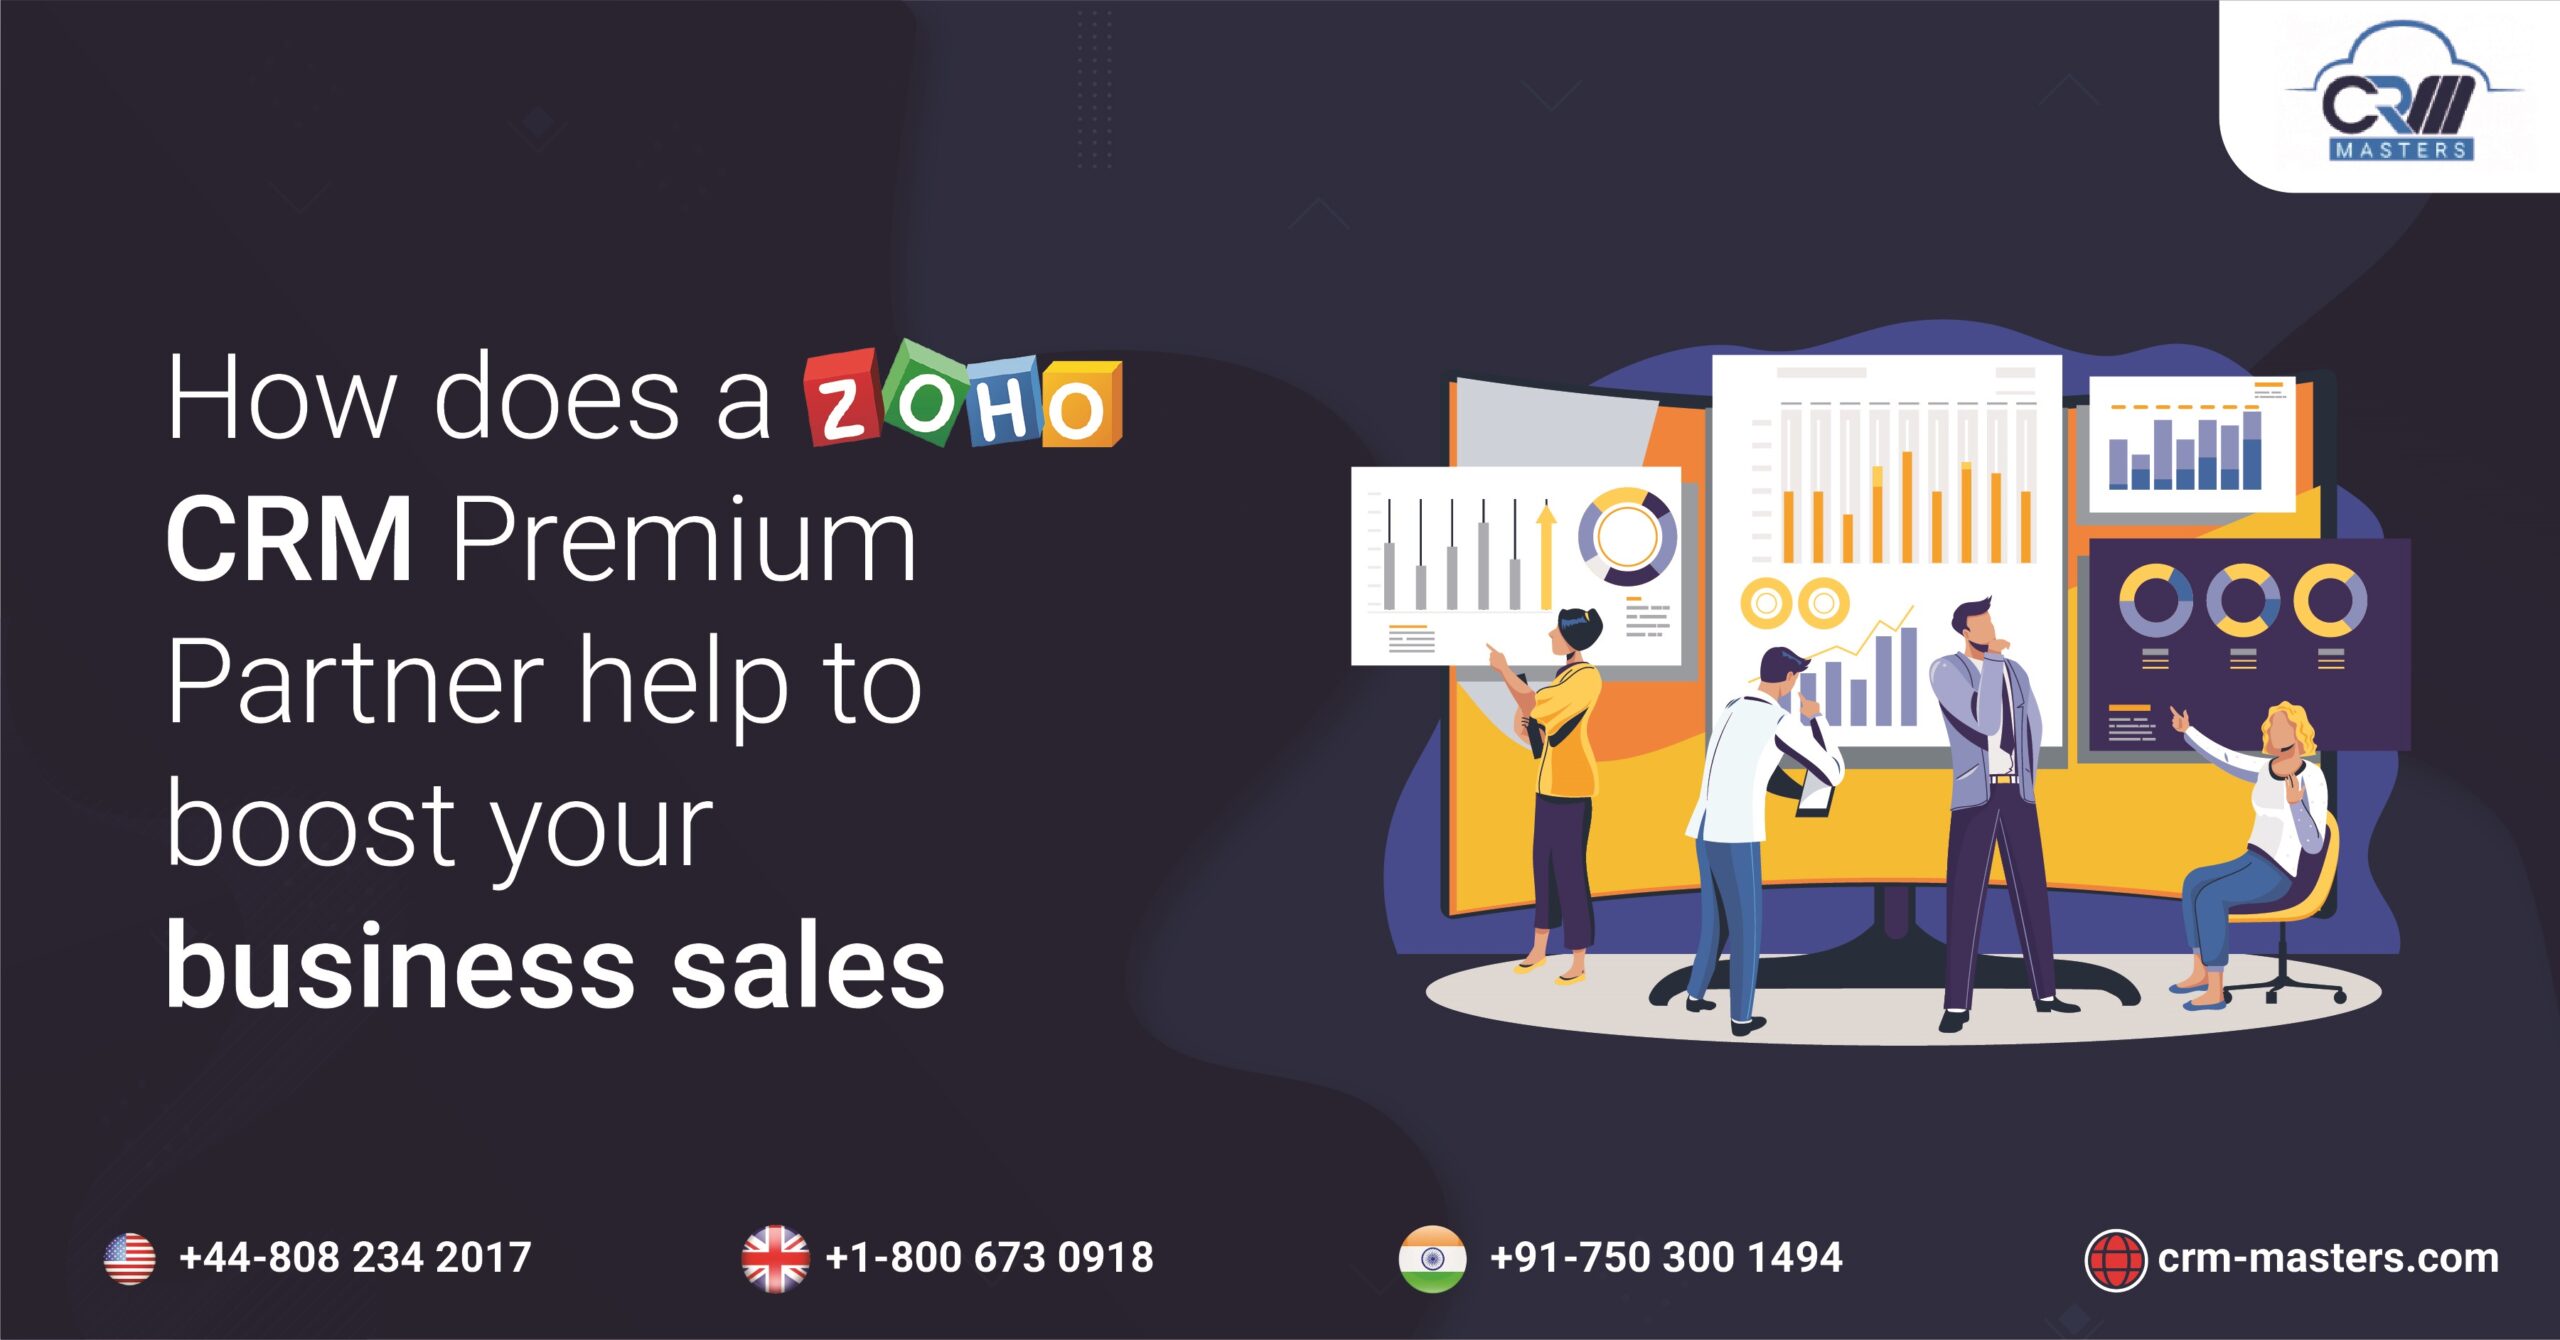 How does a Zoho CRM Premium Partner Help to Boost Your Business Sales